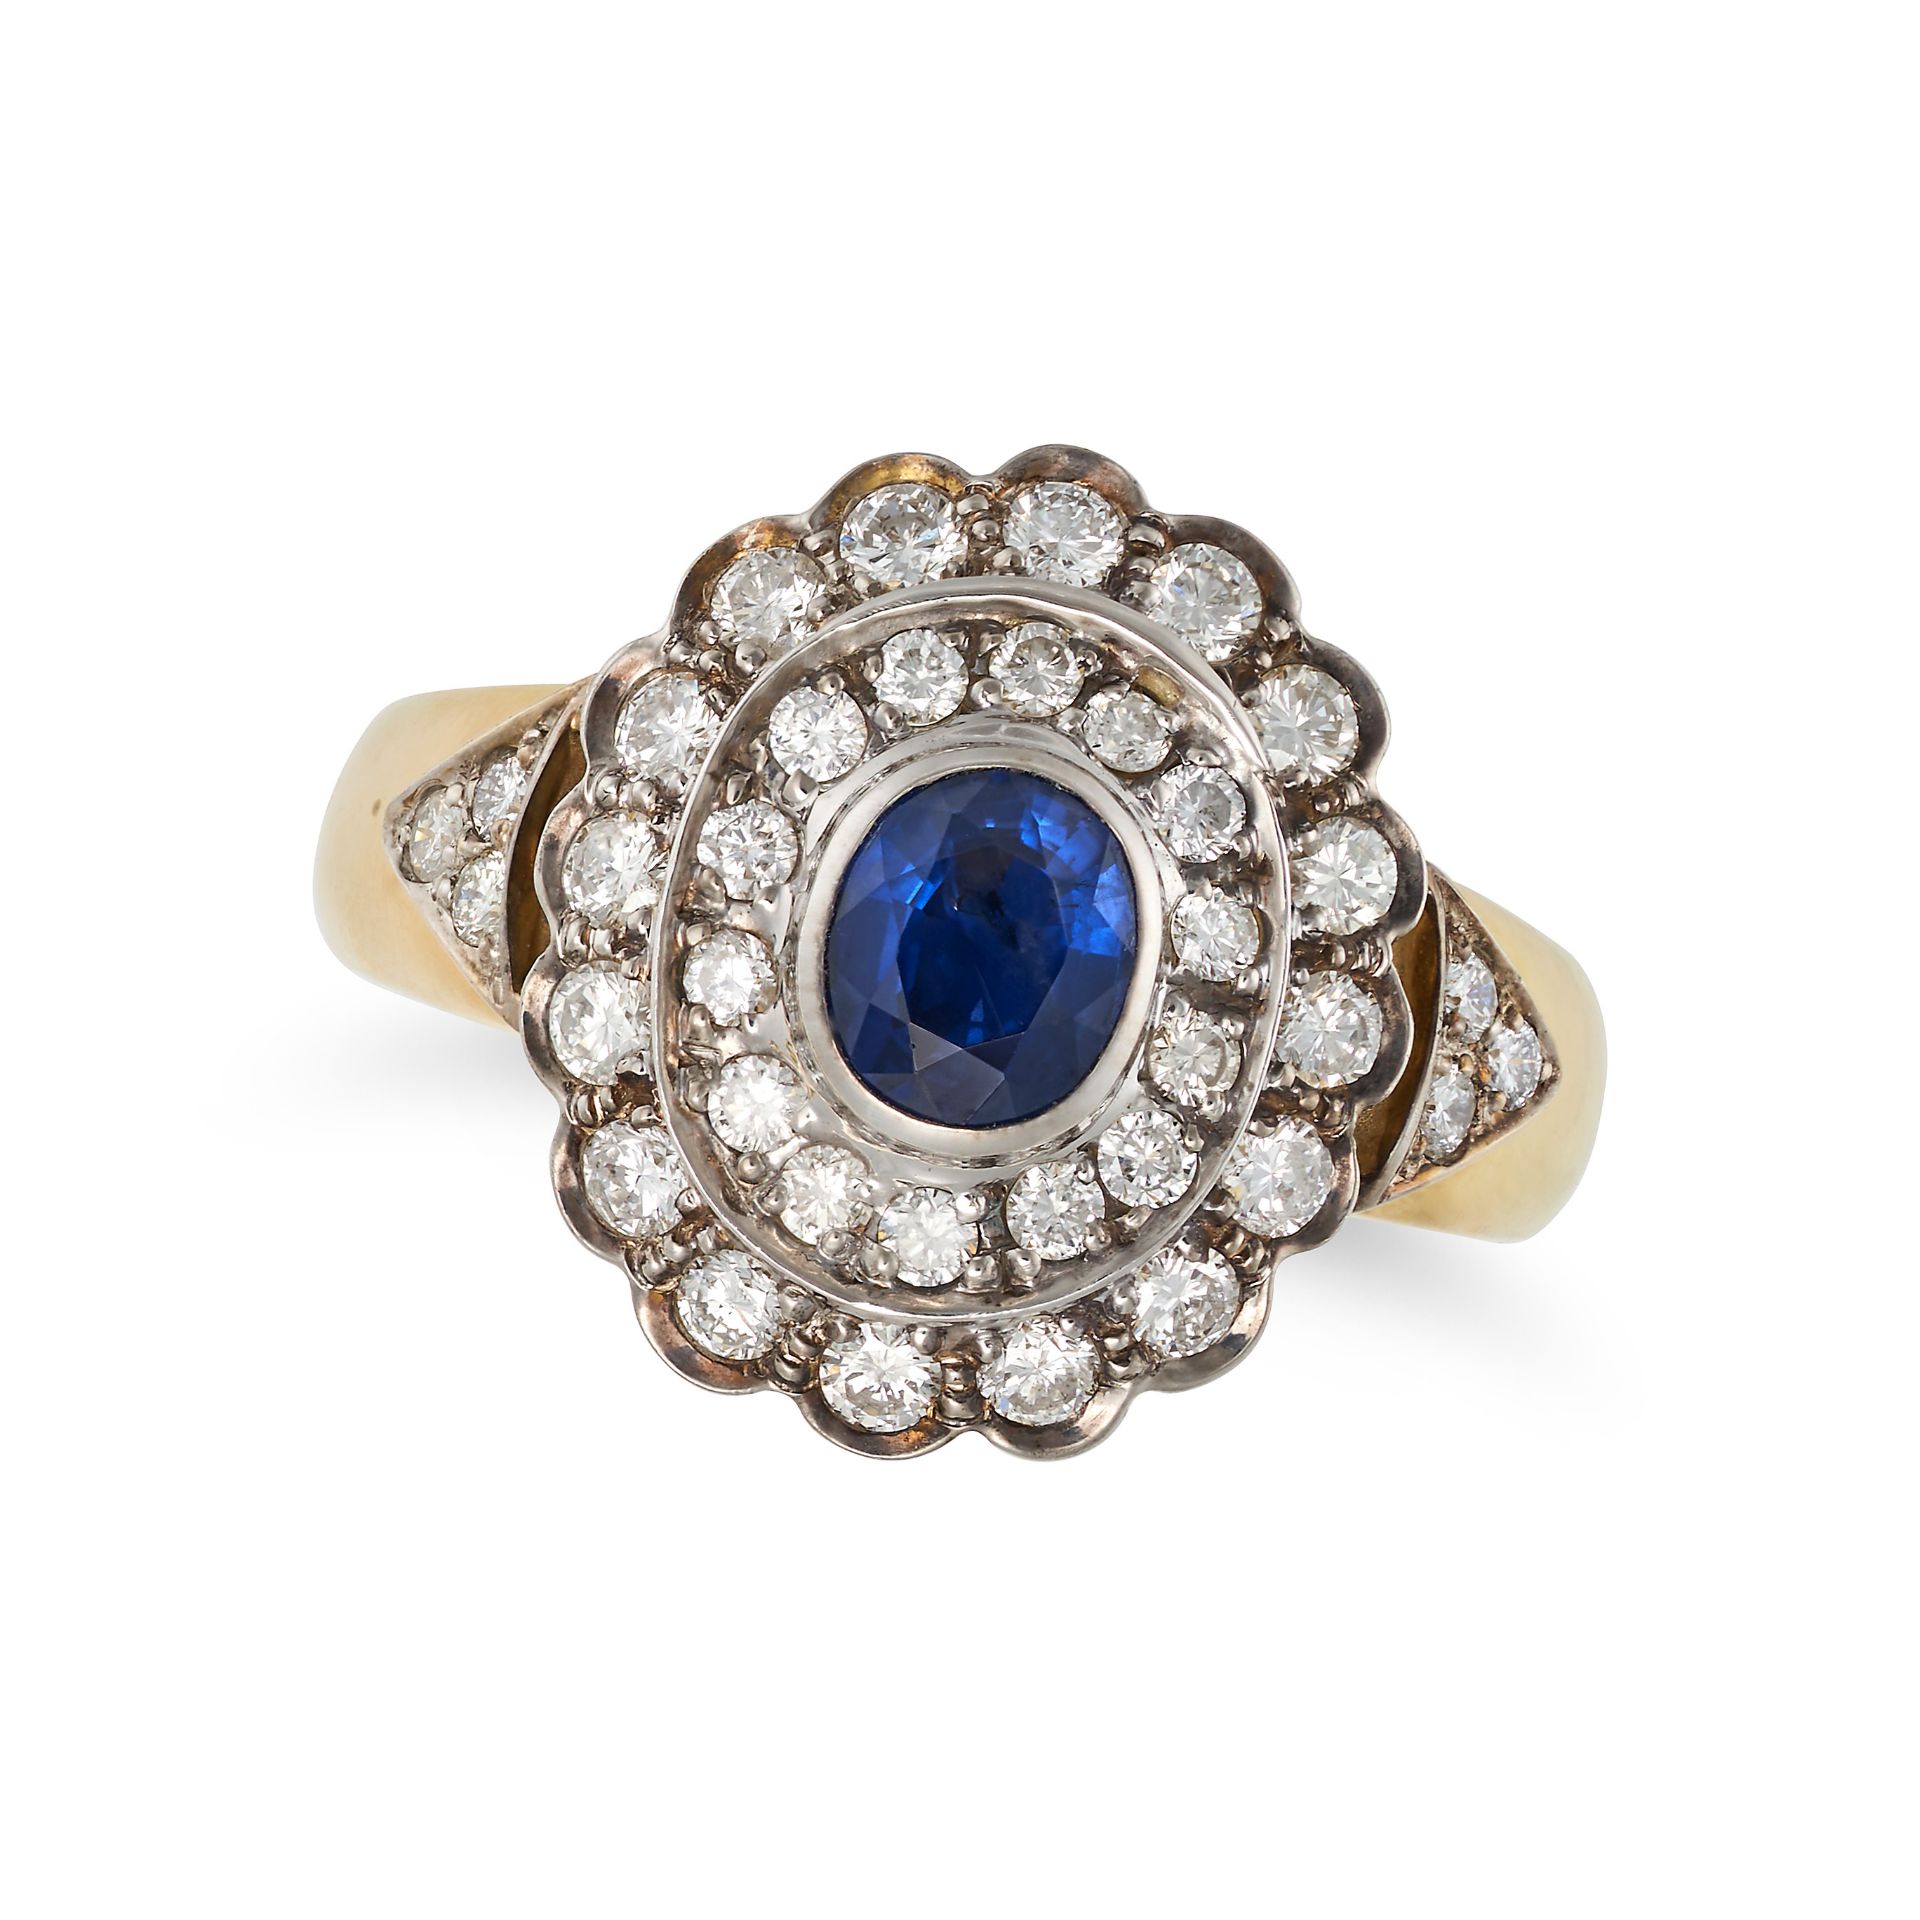 A SAPPHIRE AND DIAMOND CLUSTER RING in 18ct yellow gold, set with an oval cut sapphire of approxi...